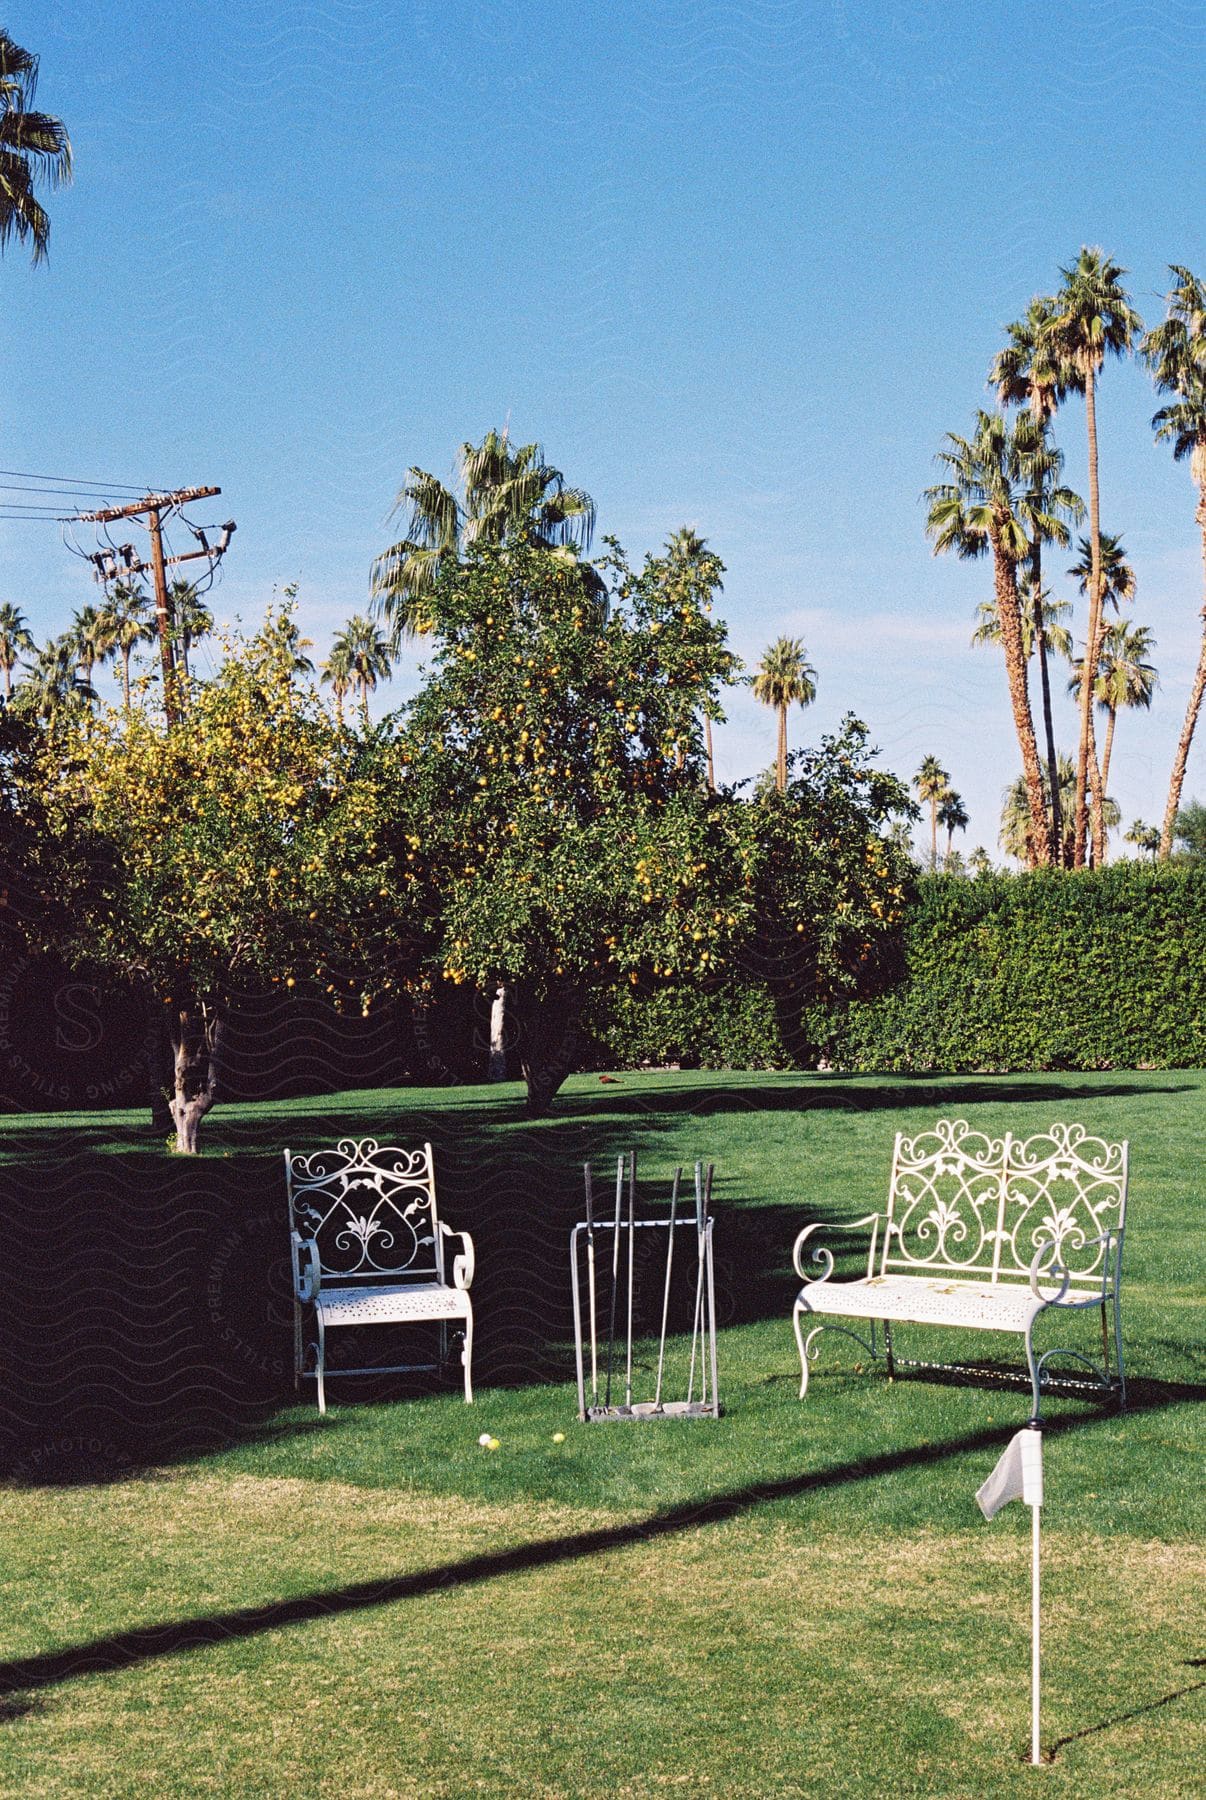 Lawn chairs and golf clubs in a back yard surrounded by hedges and palm trees in the distance